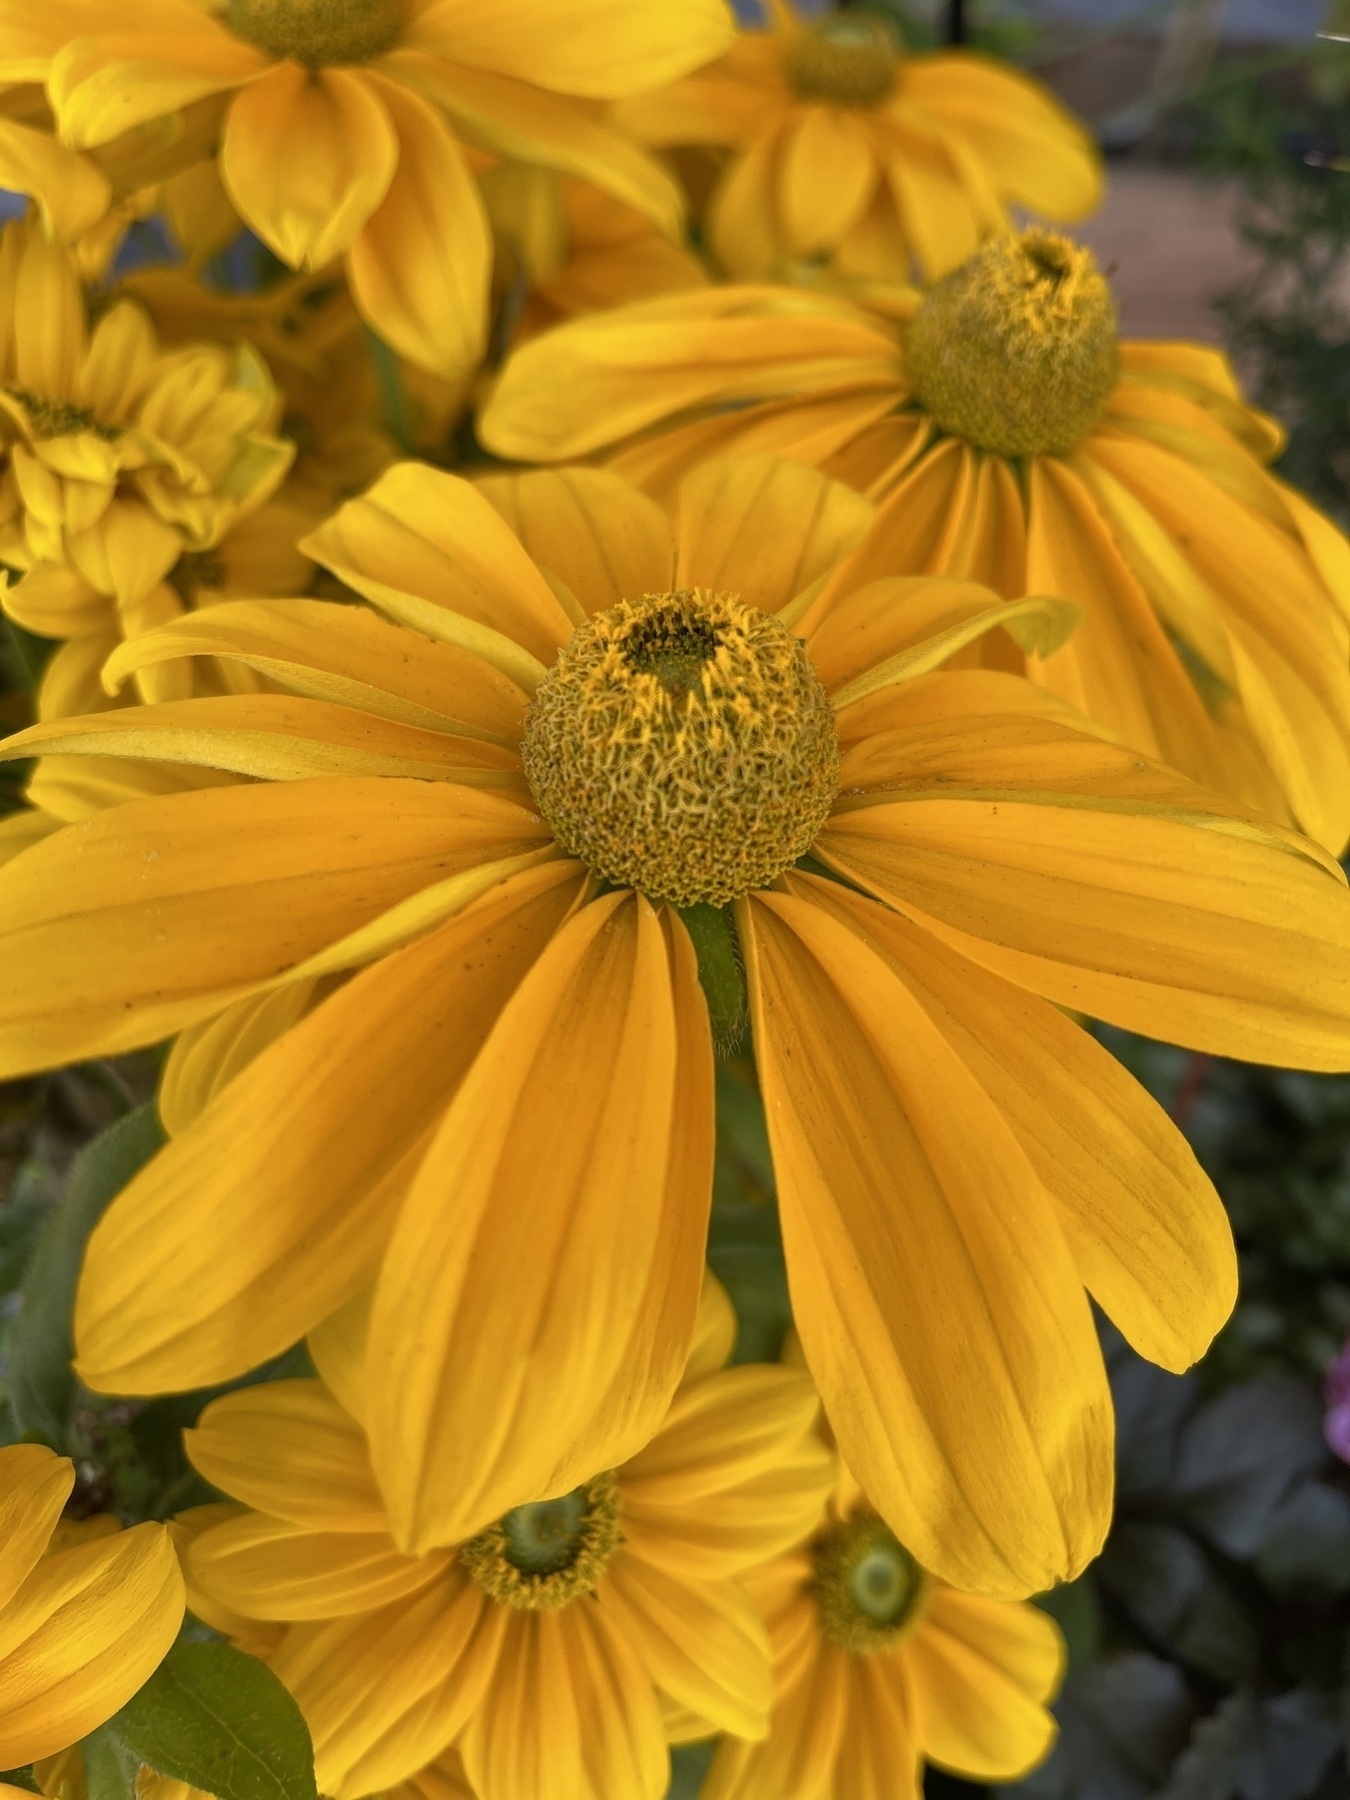 ‘Rudbeckia Ophelia’ a prominent, raised central disc in yellow surrounded by yellow petals.